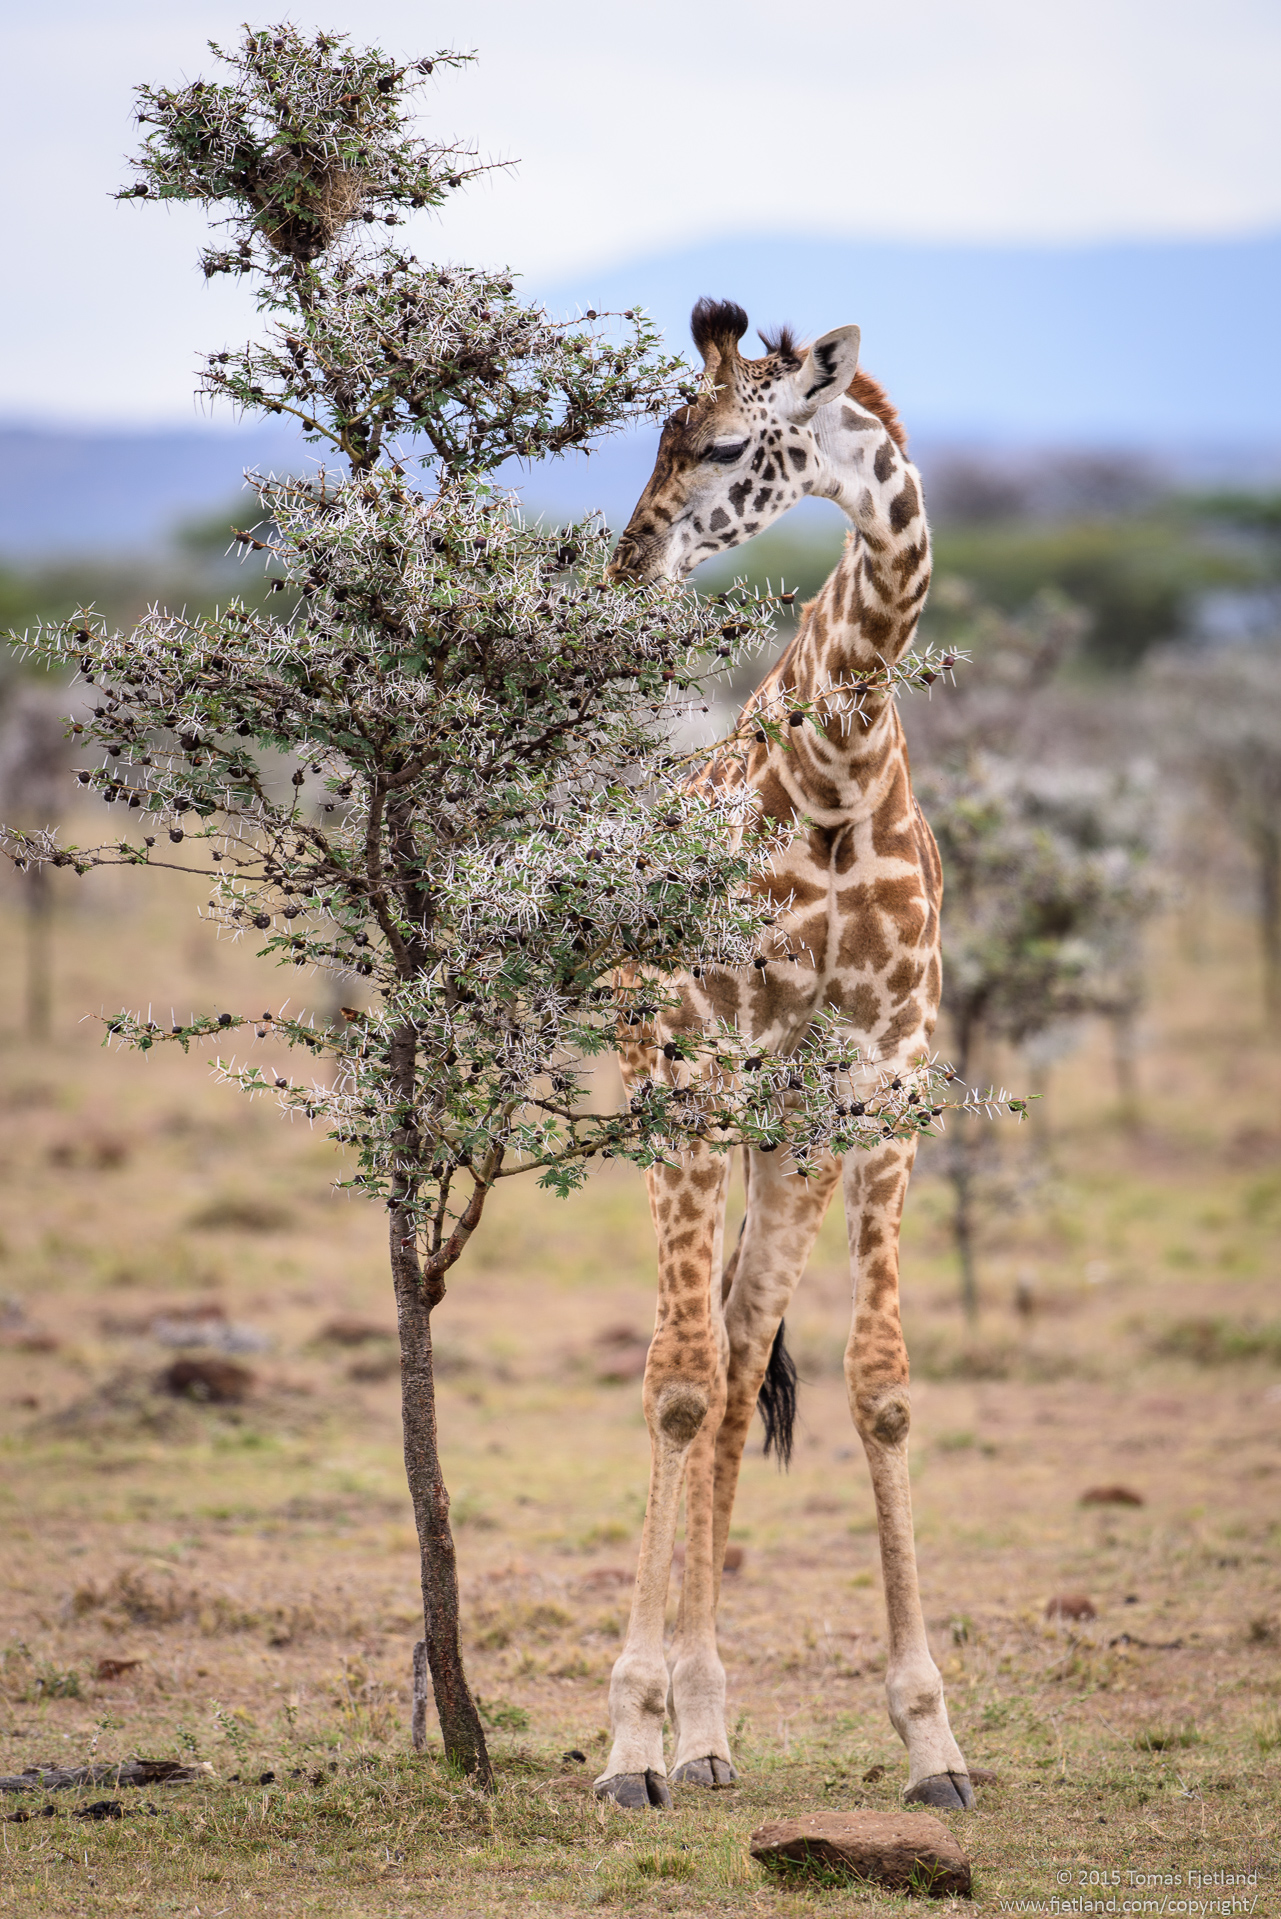 Young Masai giraffe grazing on the VERY thorny Whistling thorn acacia tree